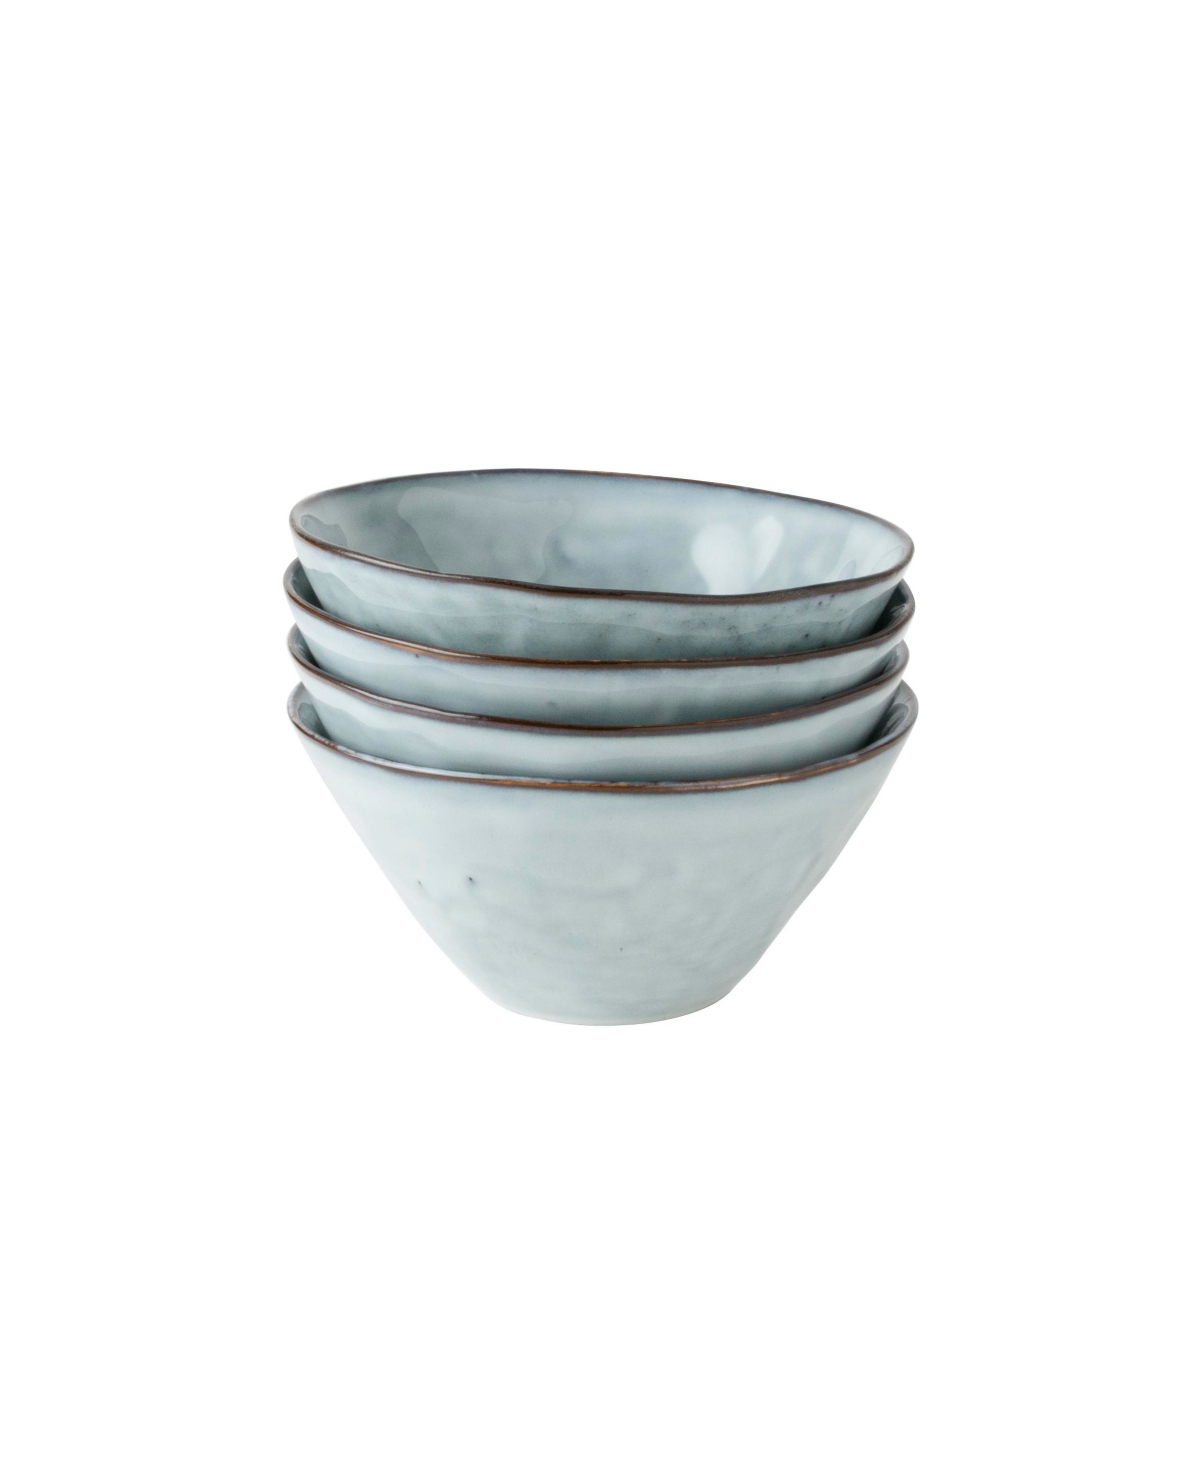 Bowl Set, Service for 4 - Green